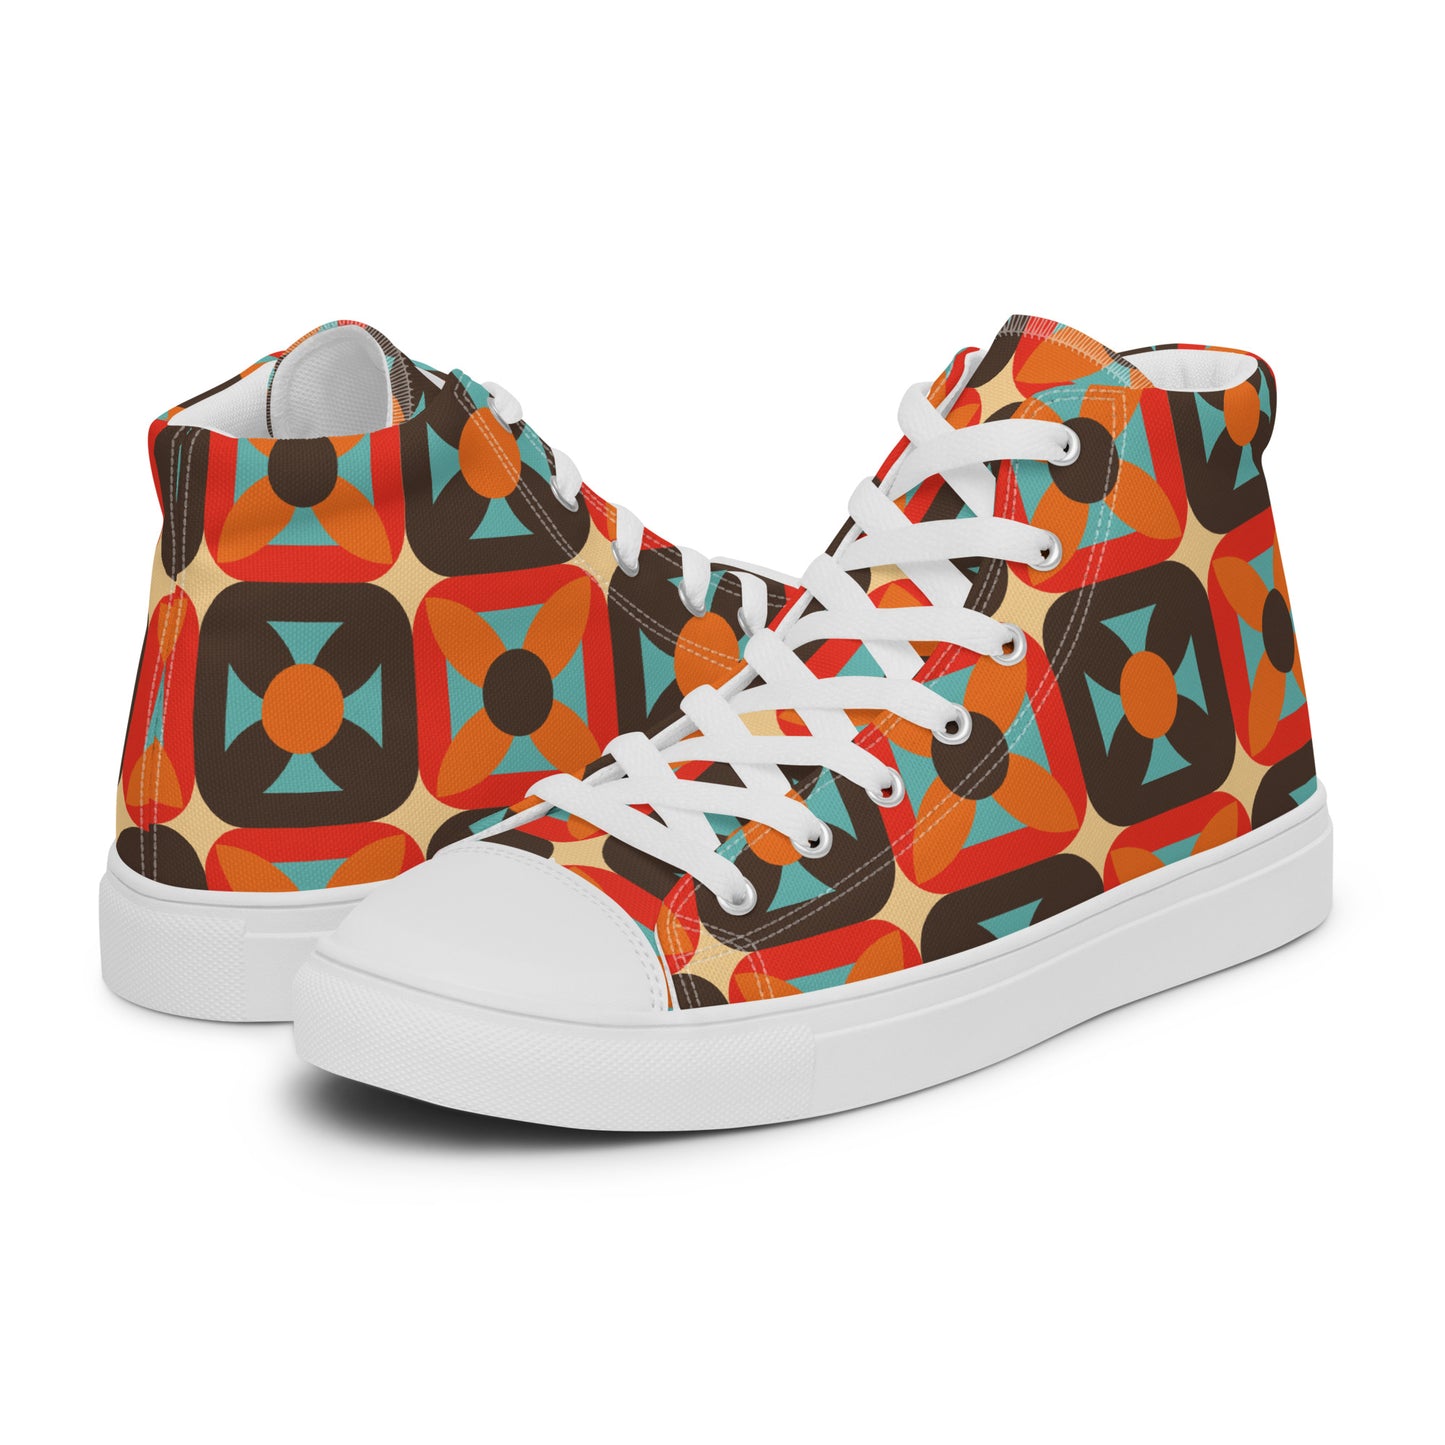 Retro Block - Sustainably Made Men’s high top canvas shoes